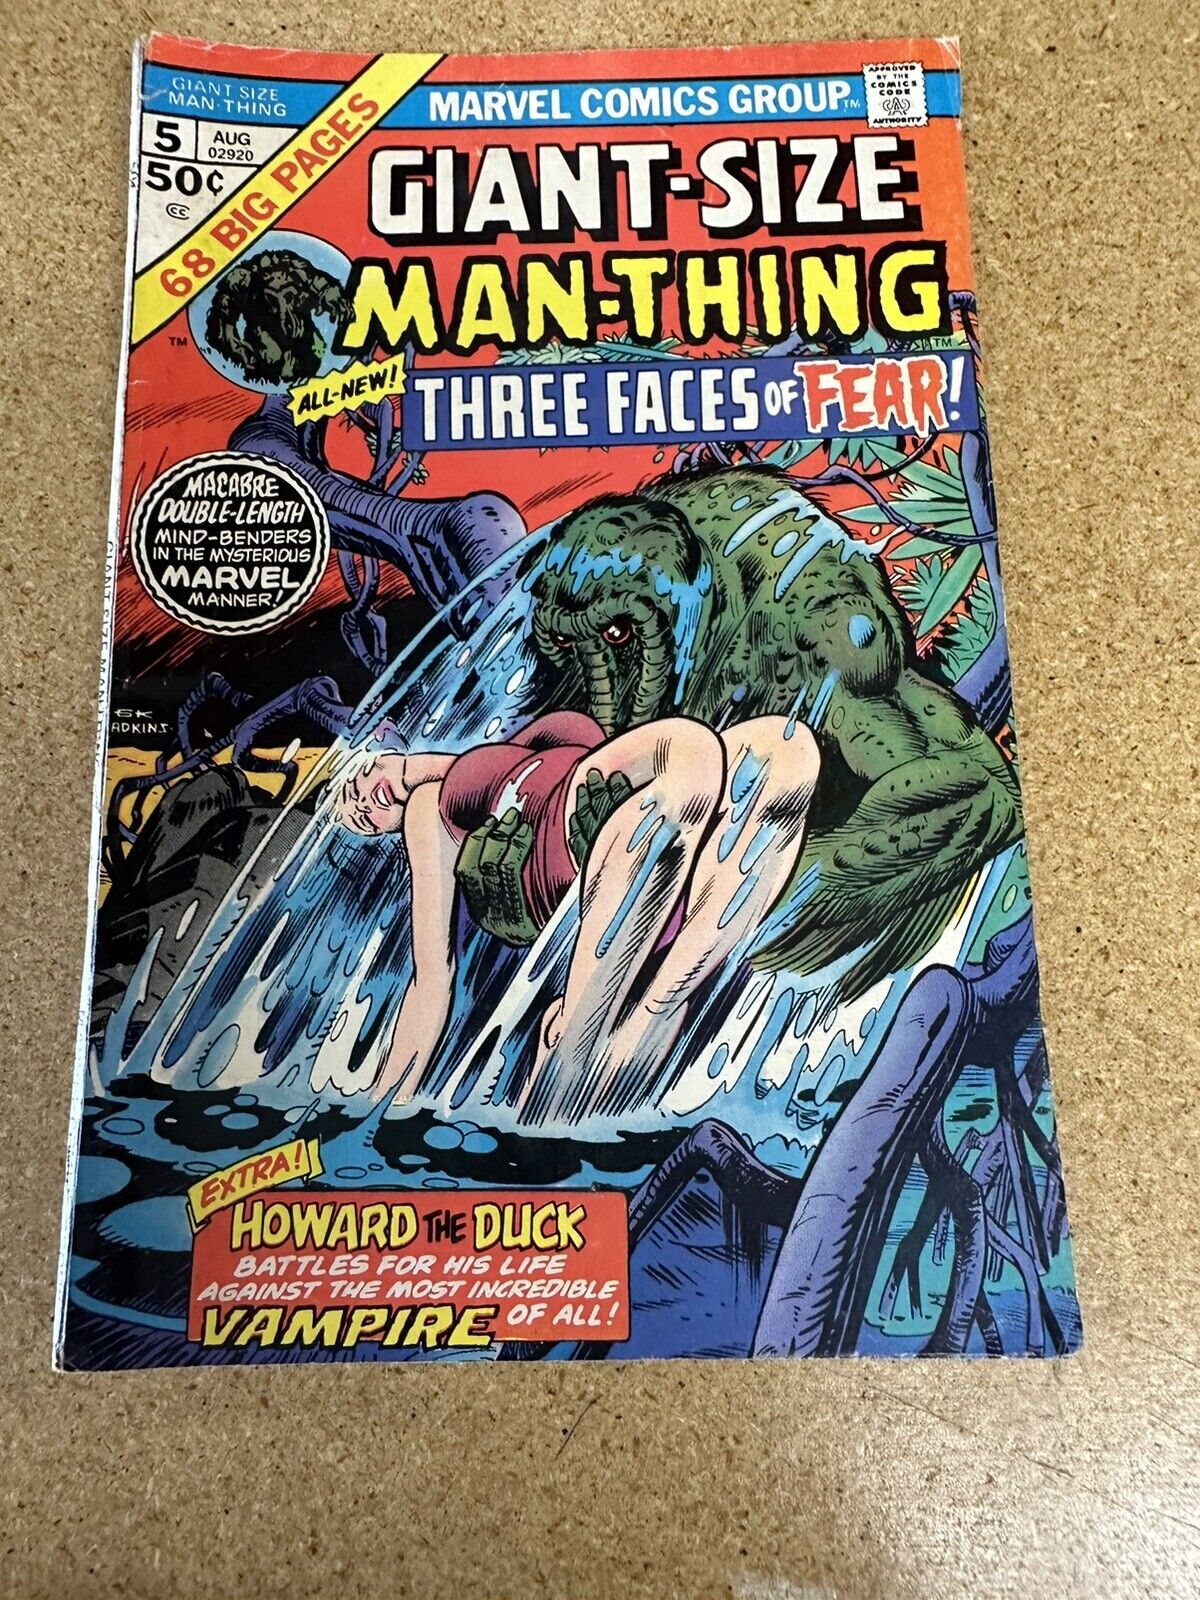 Giant-Size Man-Thing #5 Comic. Very good condition. 